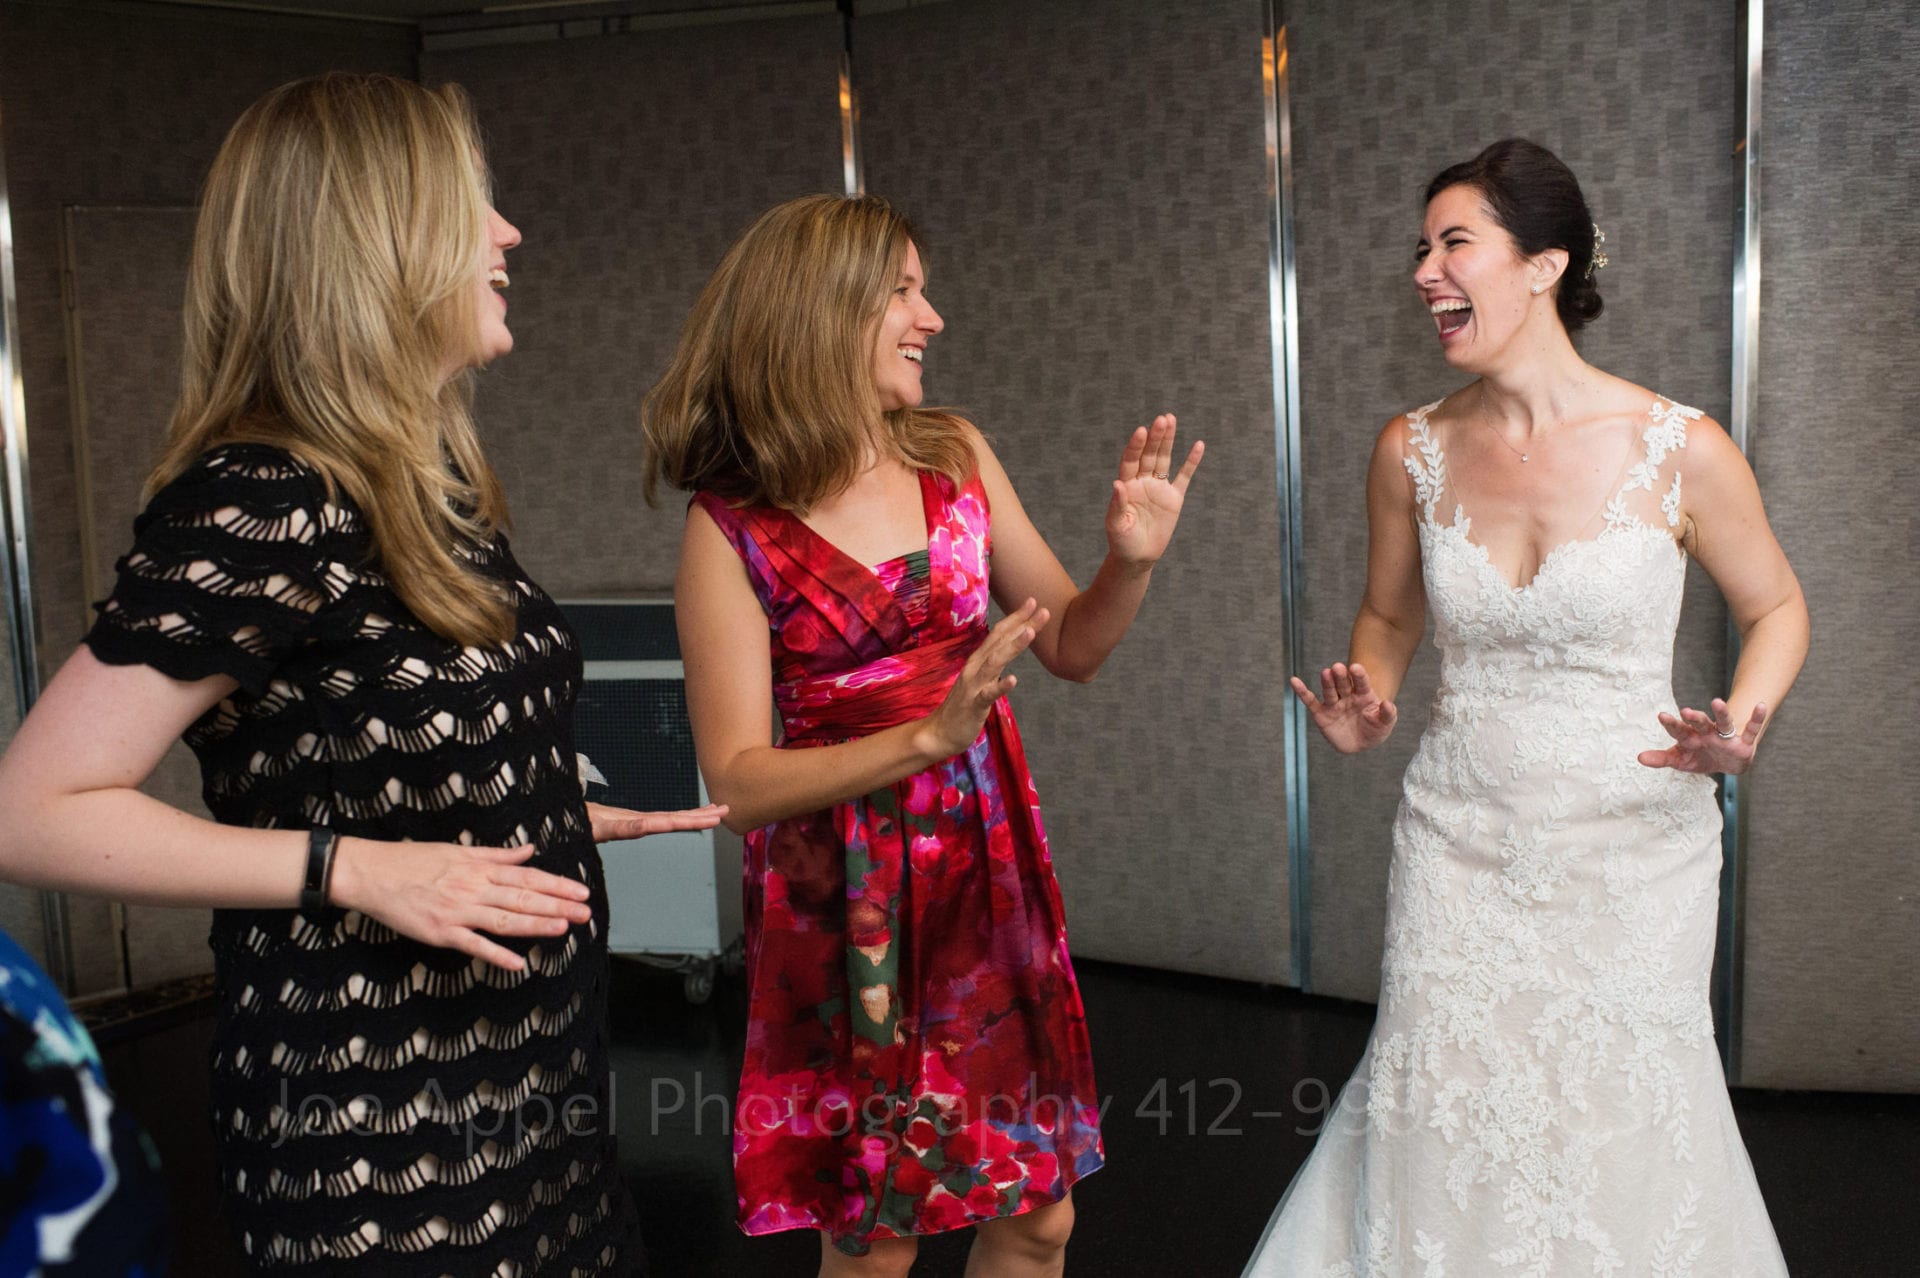 A bride in a white dress laughs as she dances with two other women